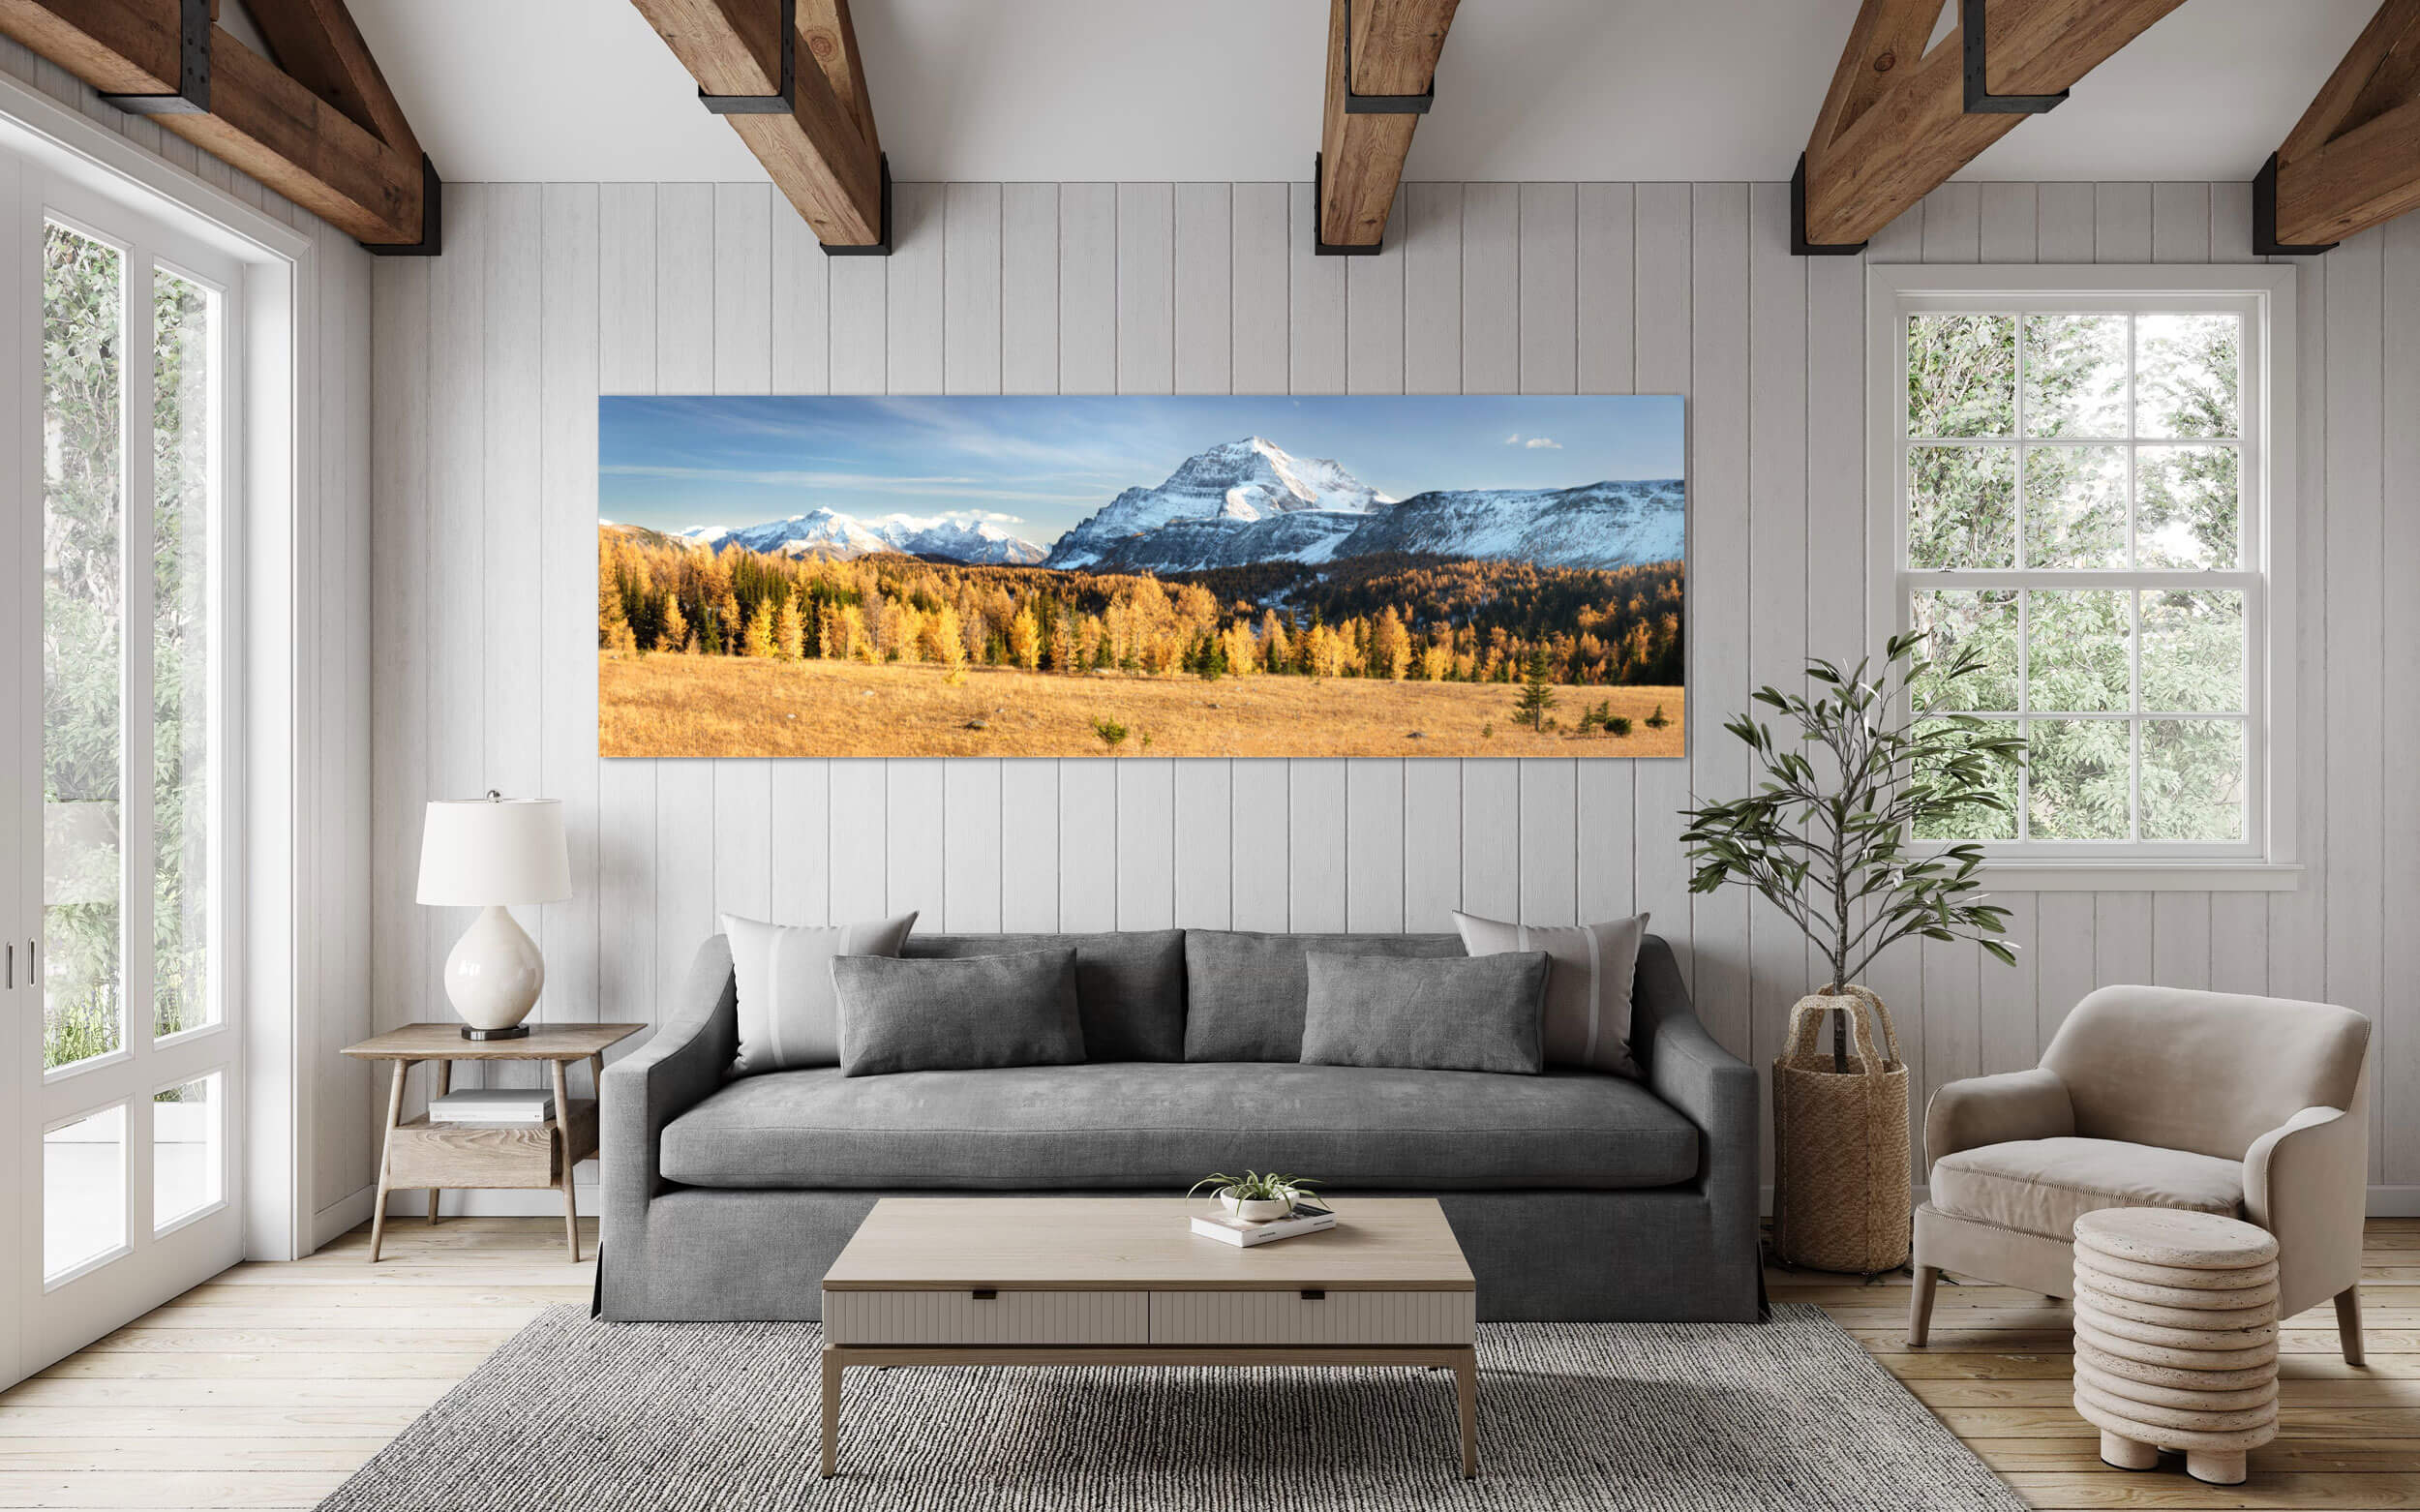 A picture of the golden larches on Healy Pass in Banff hangs in a living room.